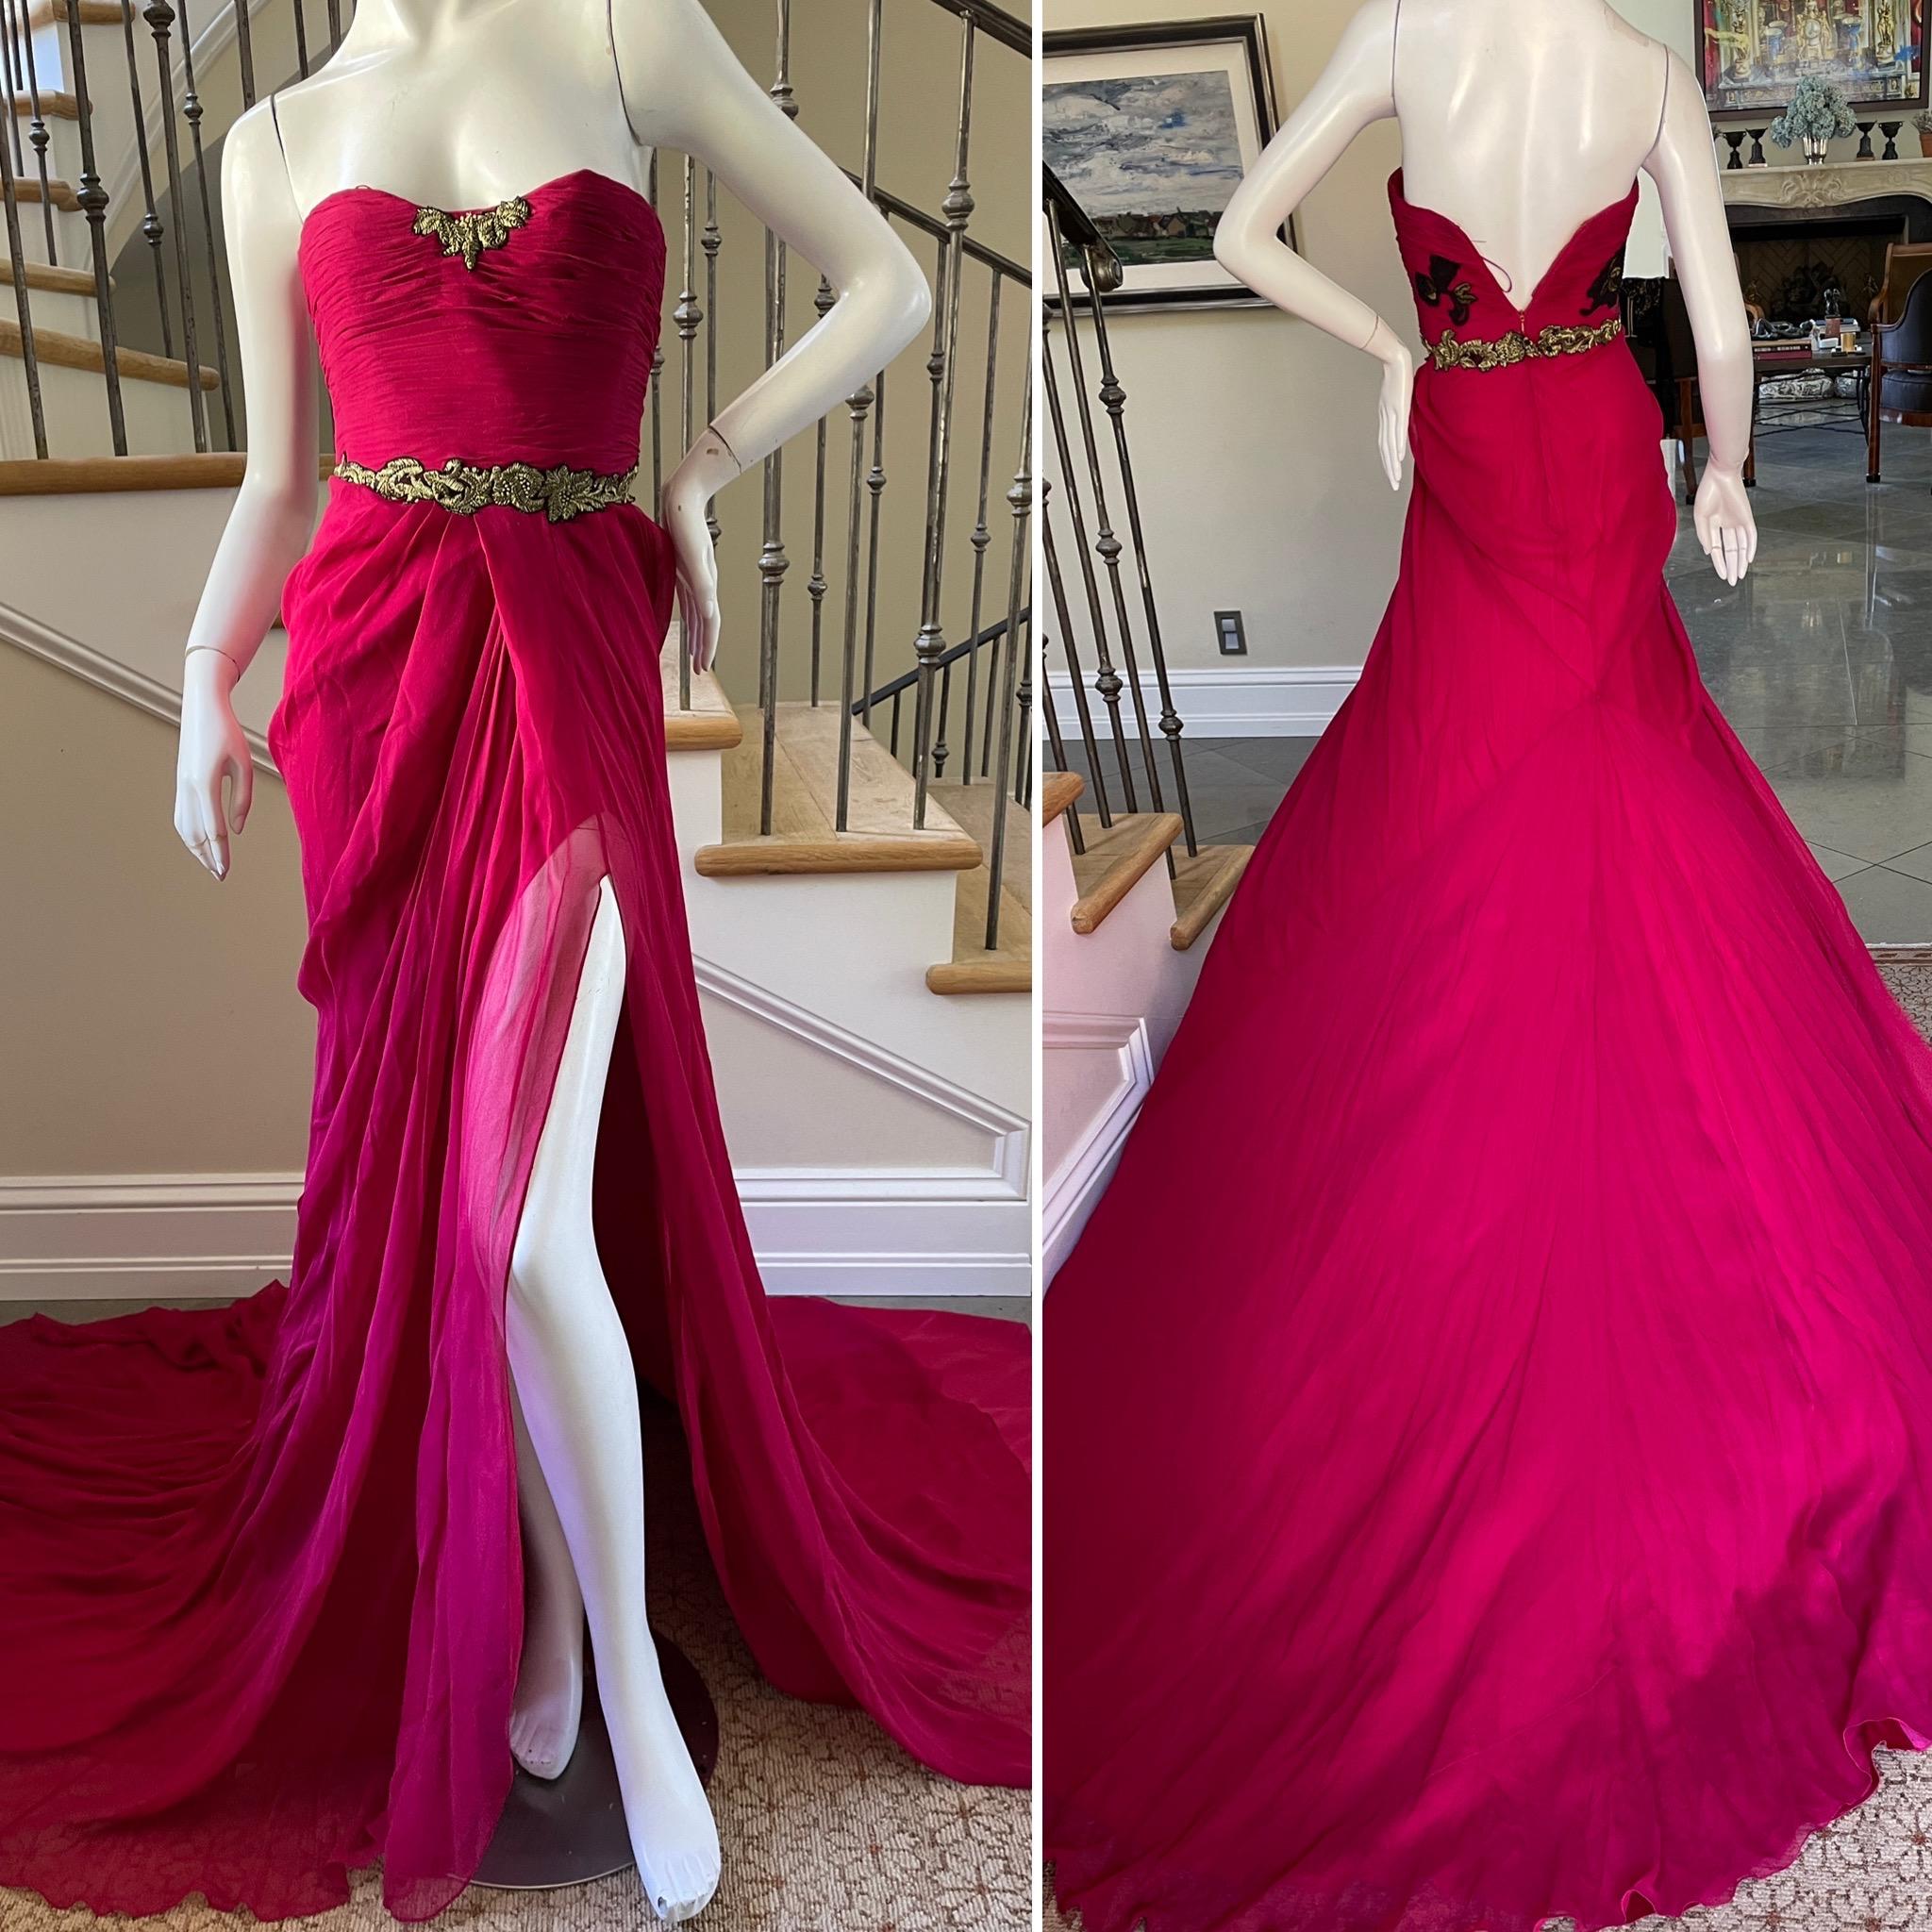 Jason Wu Spring 2011 Dramatic Strapless Red Evening Dress with Train For Sale 3